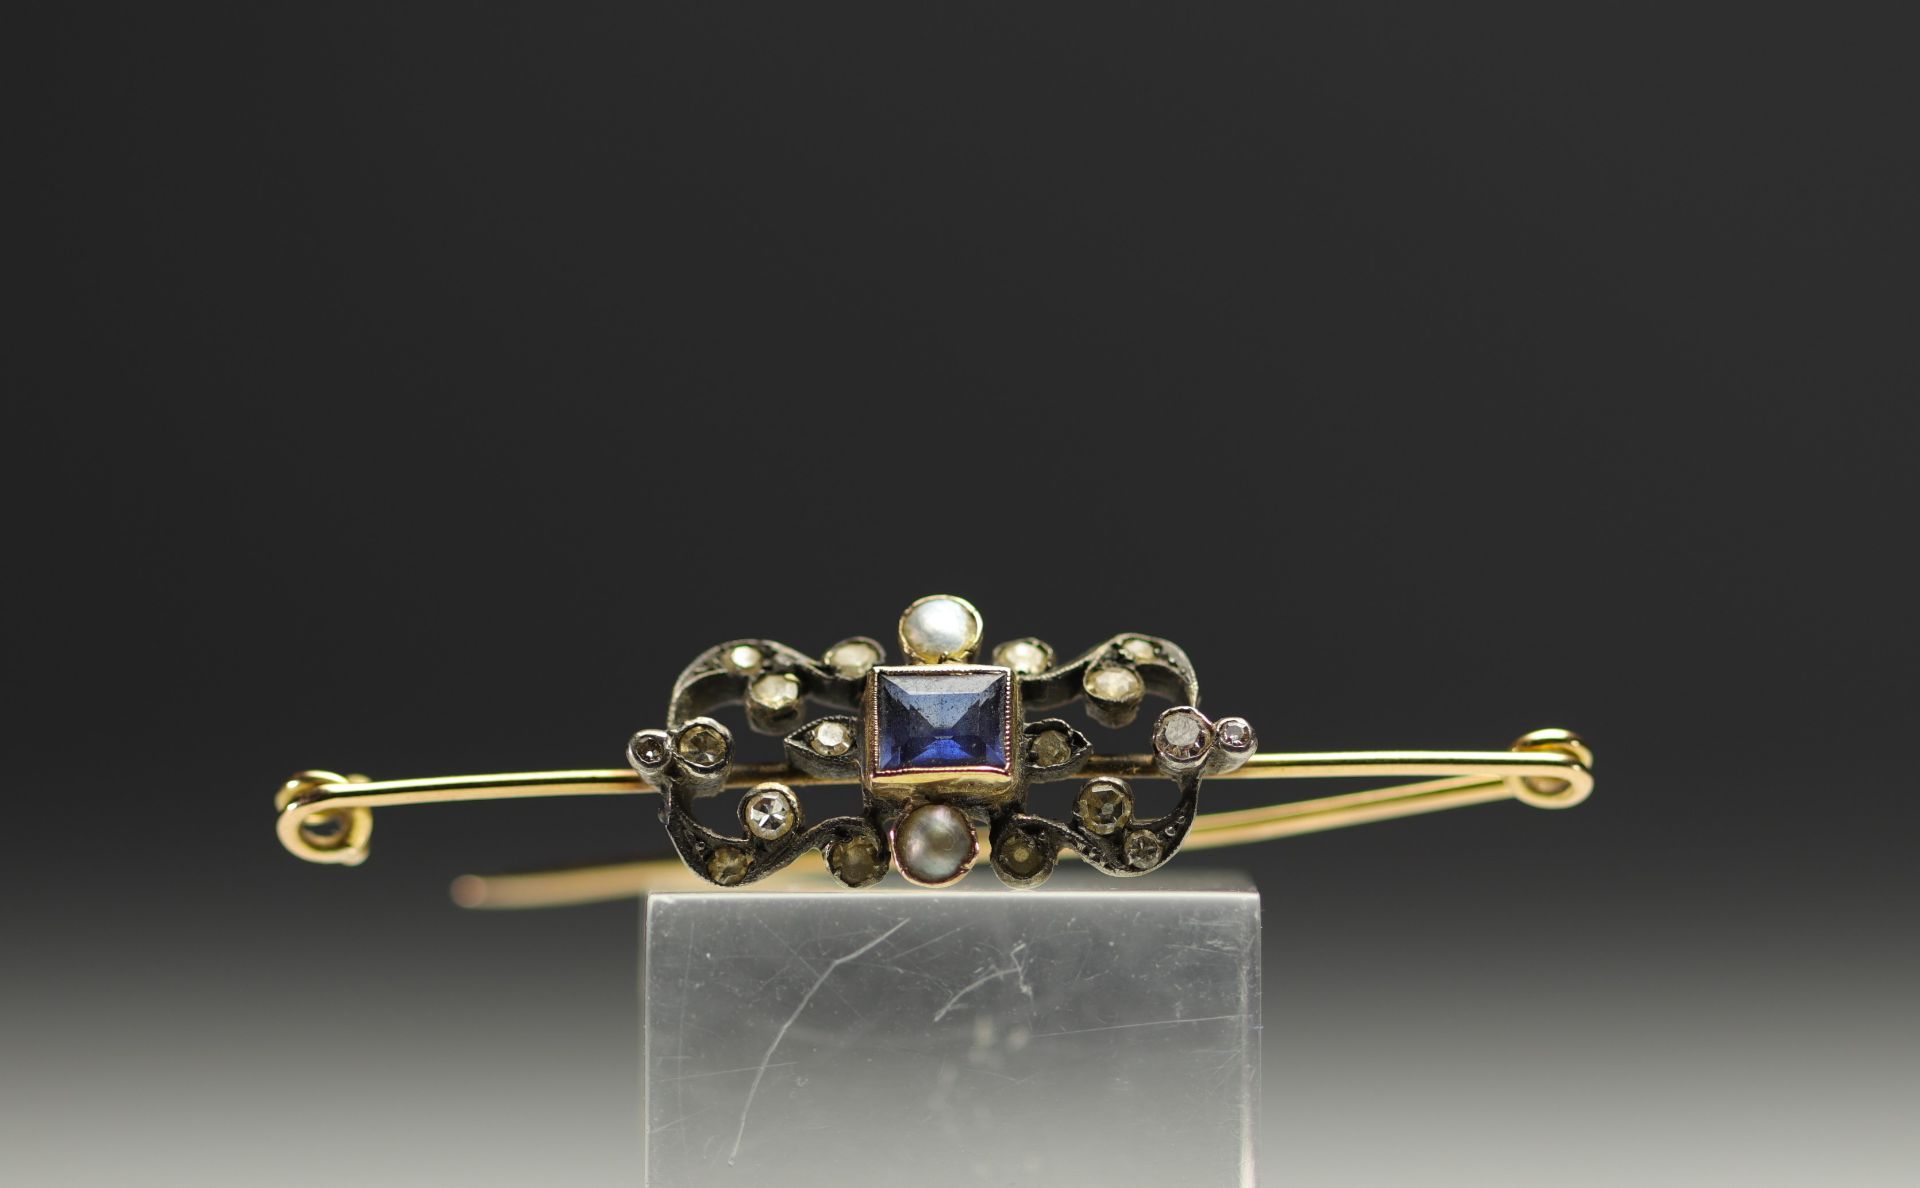 Brooch in 18k gold, platinum, sapphire, pearls and diamonds weighing 5.7gr.